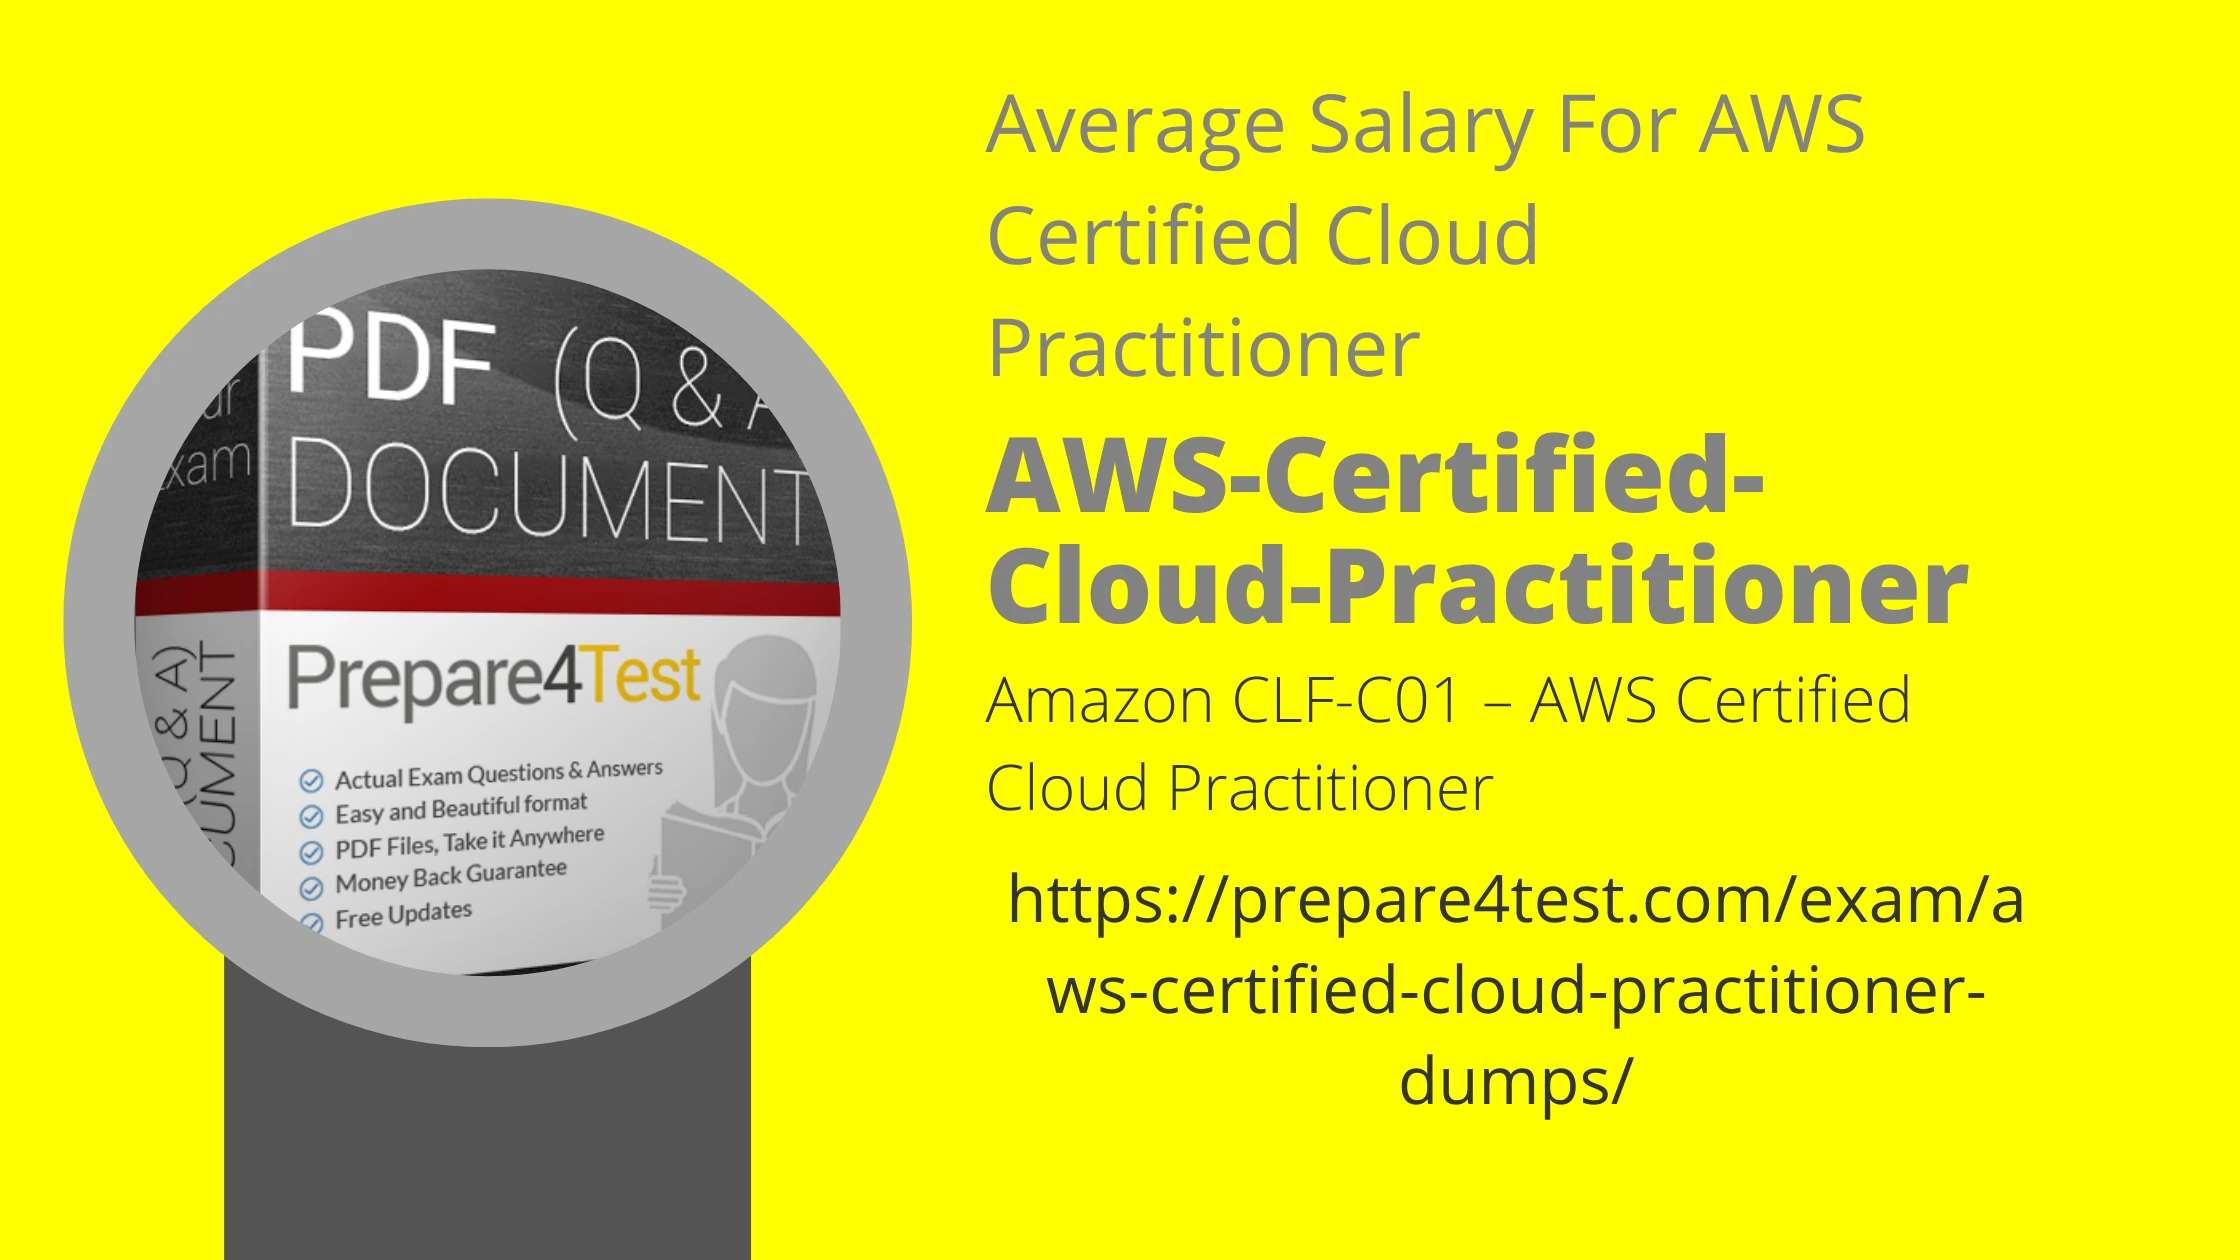 Average Salary For AWS Certified Cloud Practitioner promotion detail